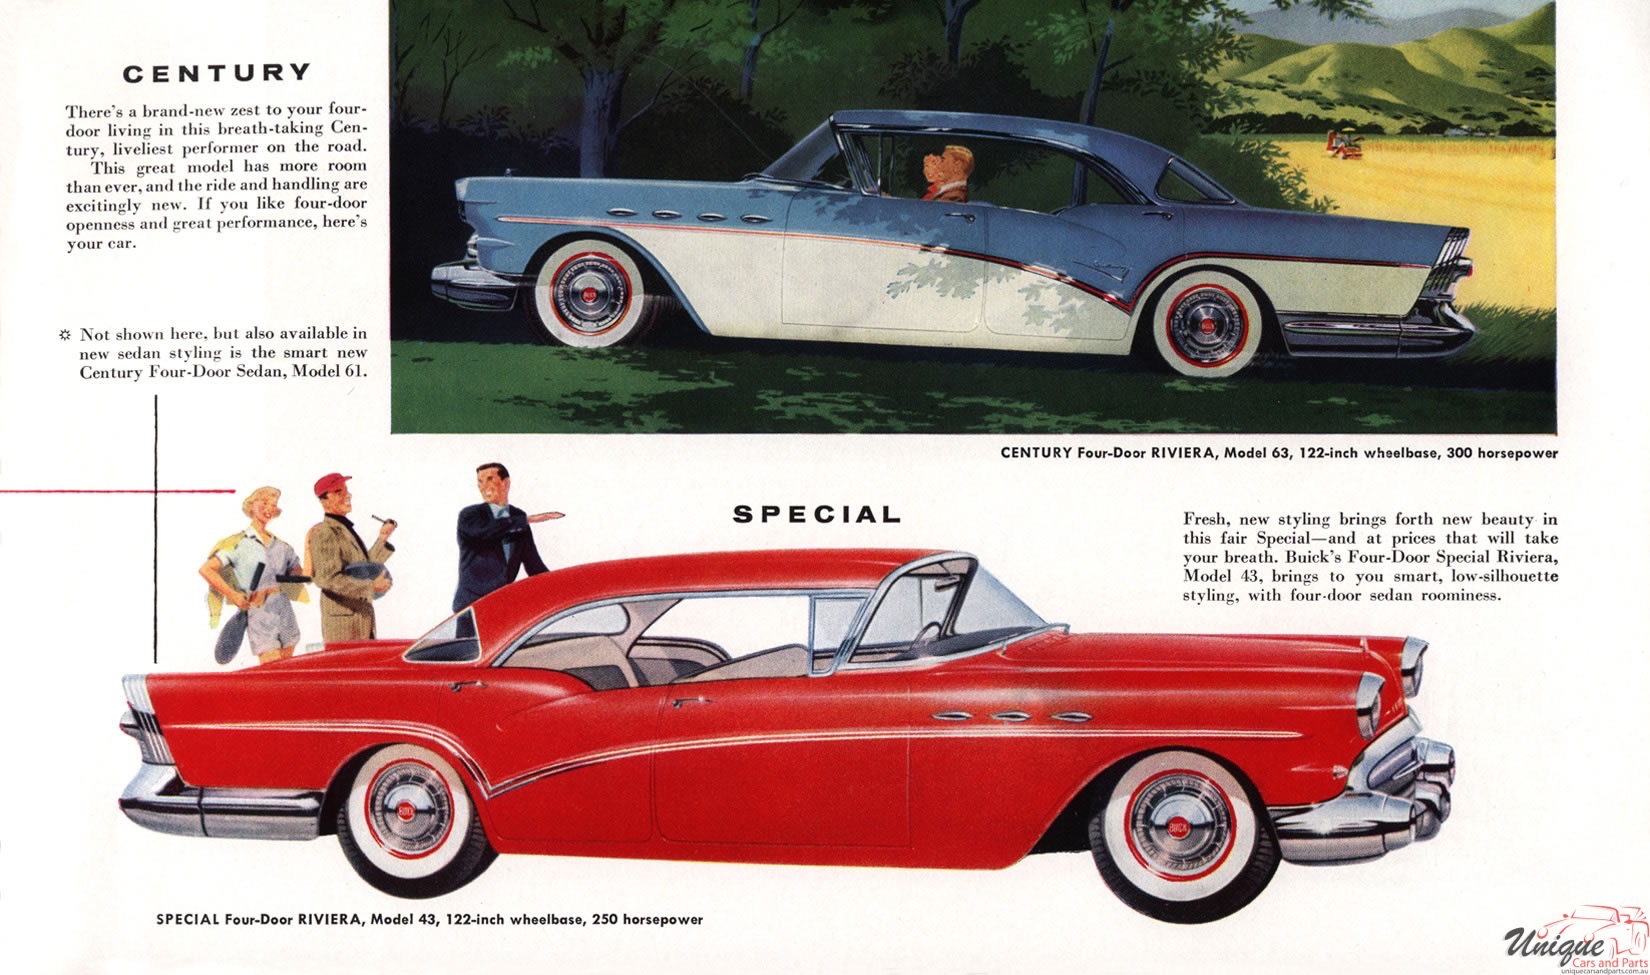 1957 Buick Brochure Page 7